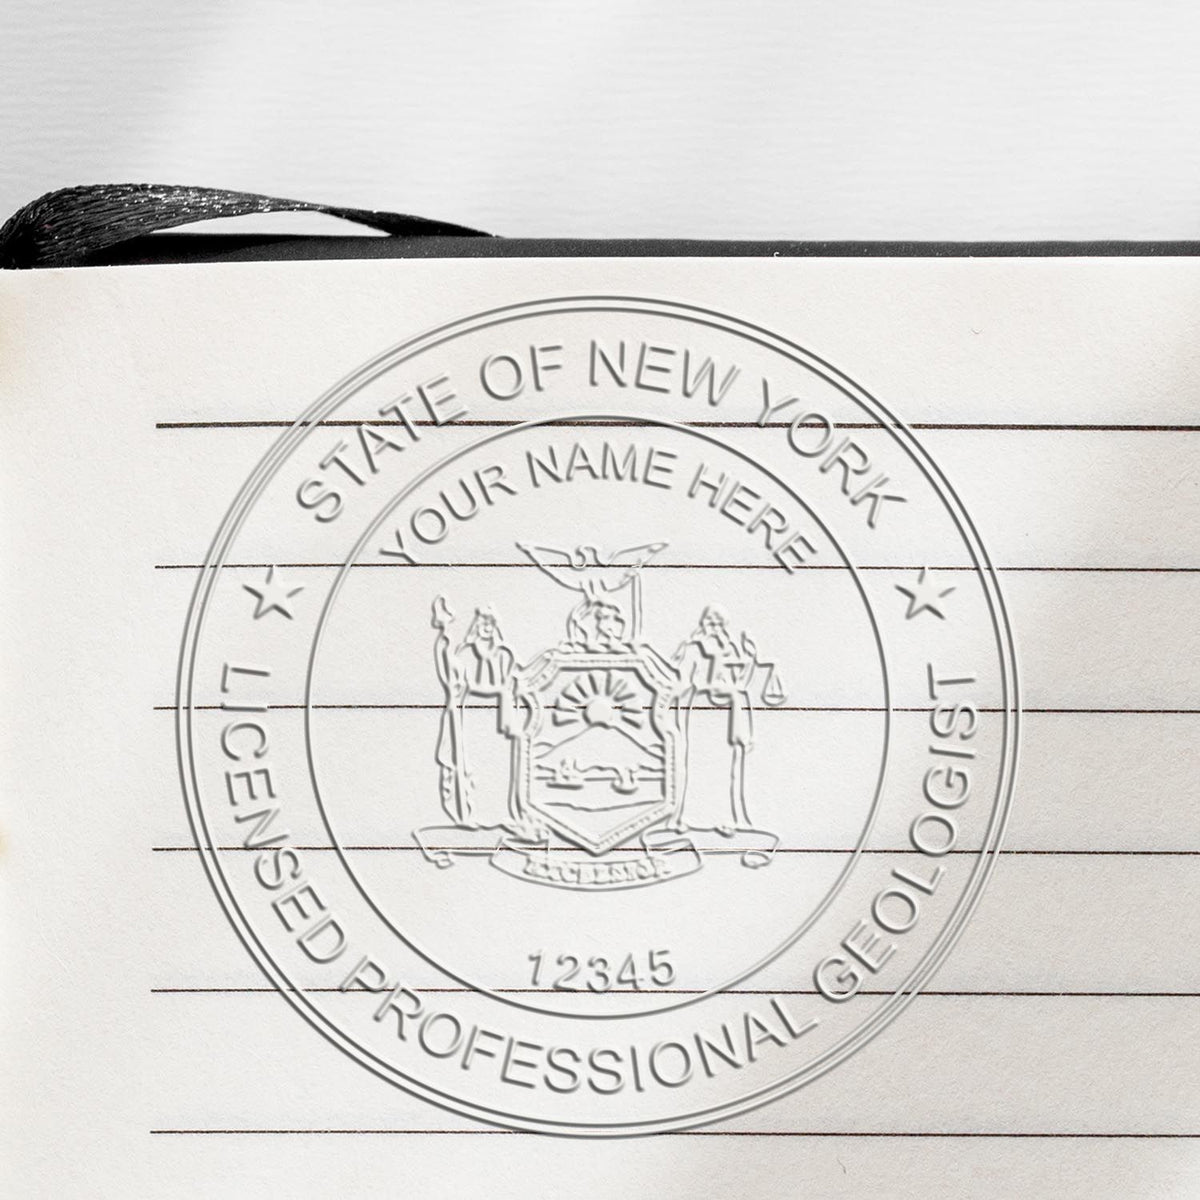 An alternative view of the Soft New York Professional Geologist Seal stamped on a sheet of paper showing the image in use